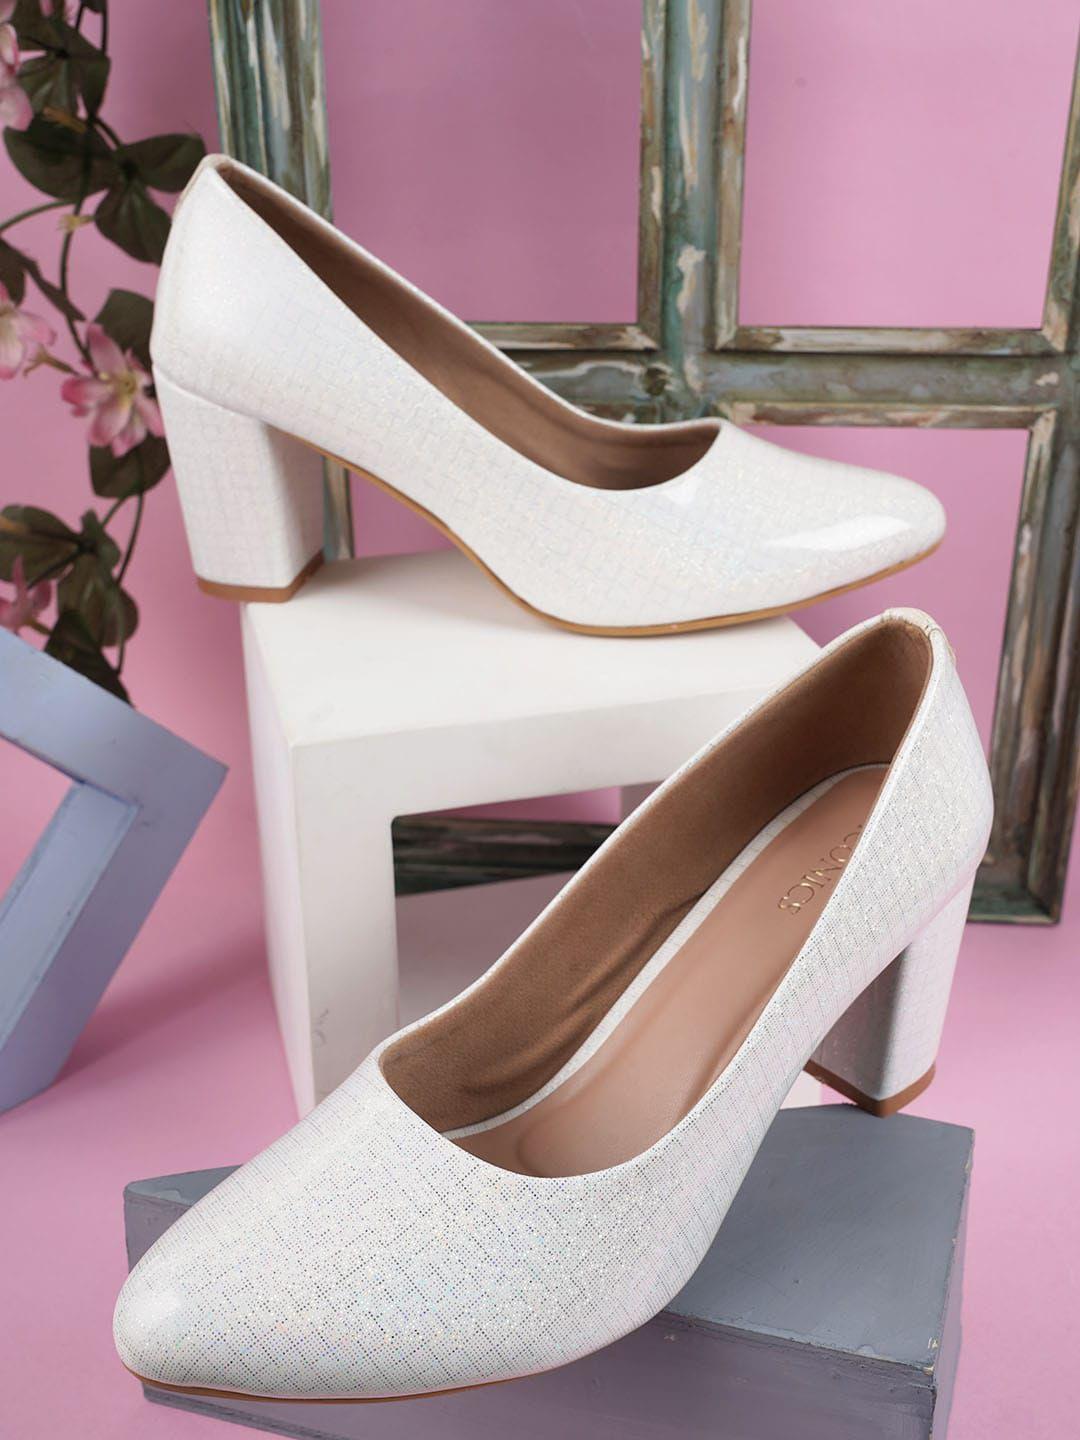 iconics pointed toe work block pumps